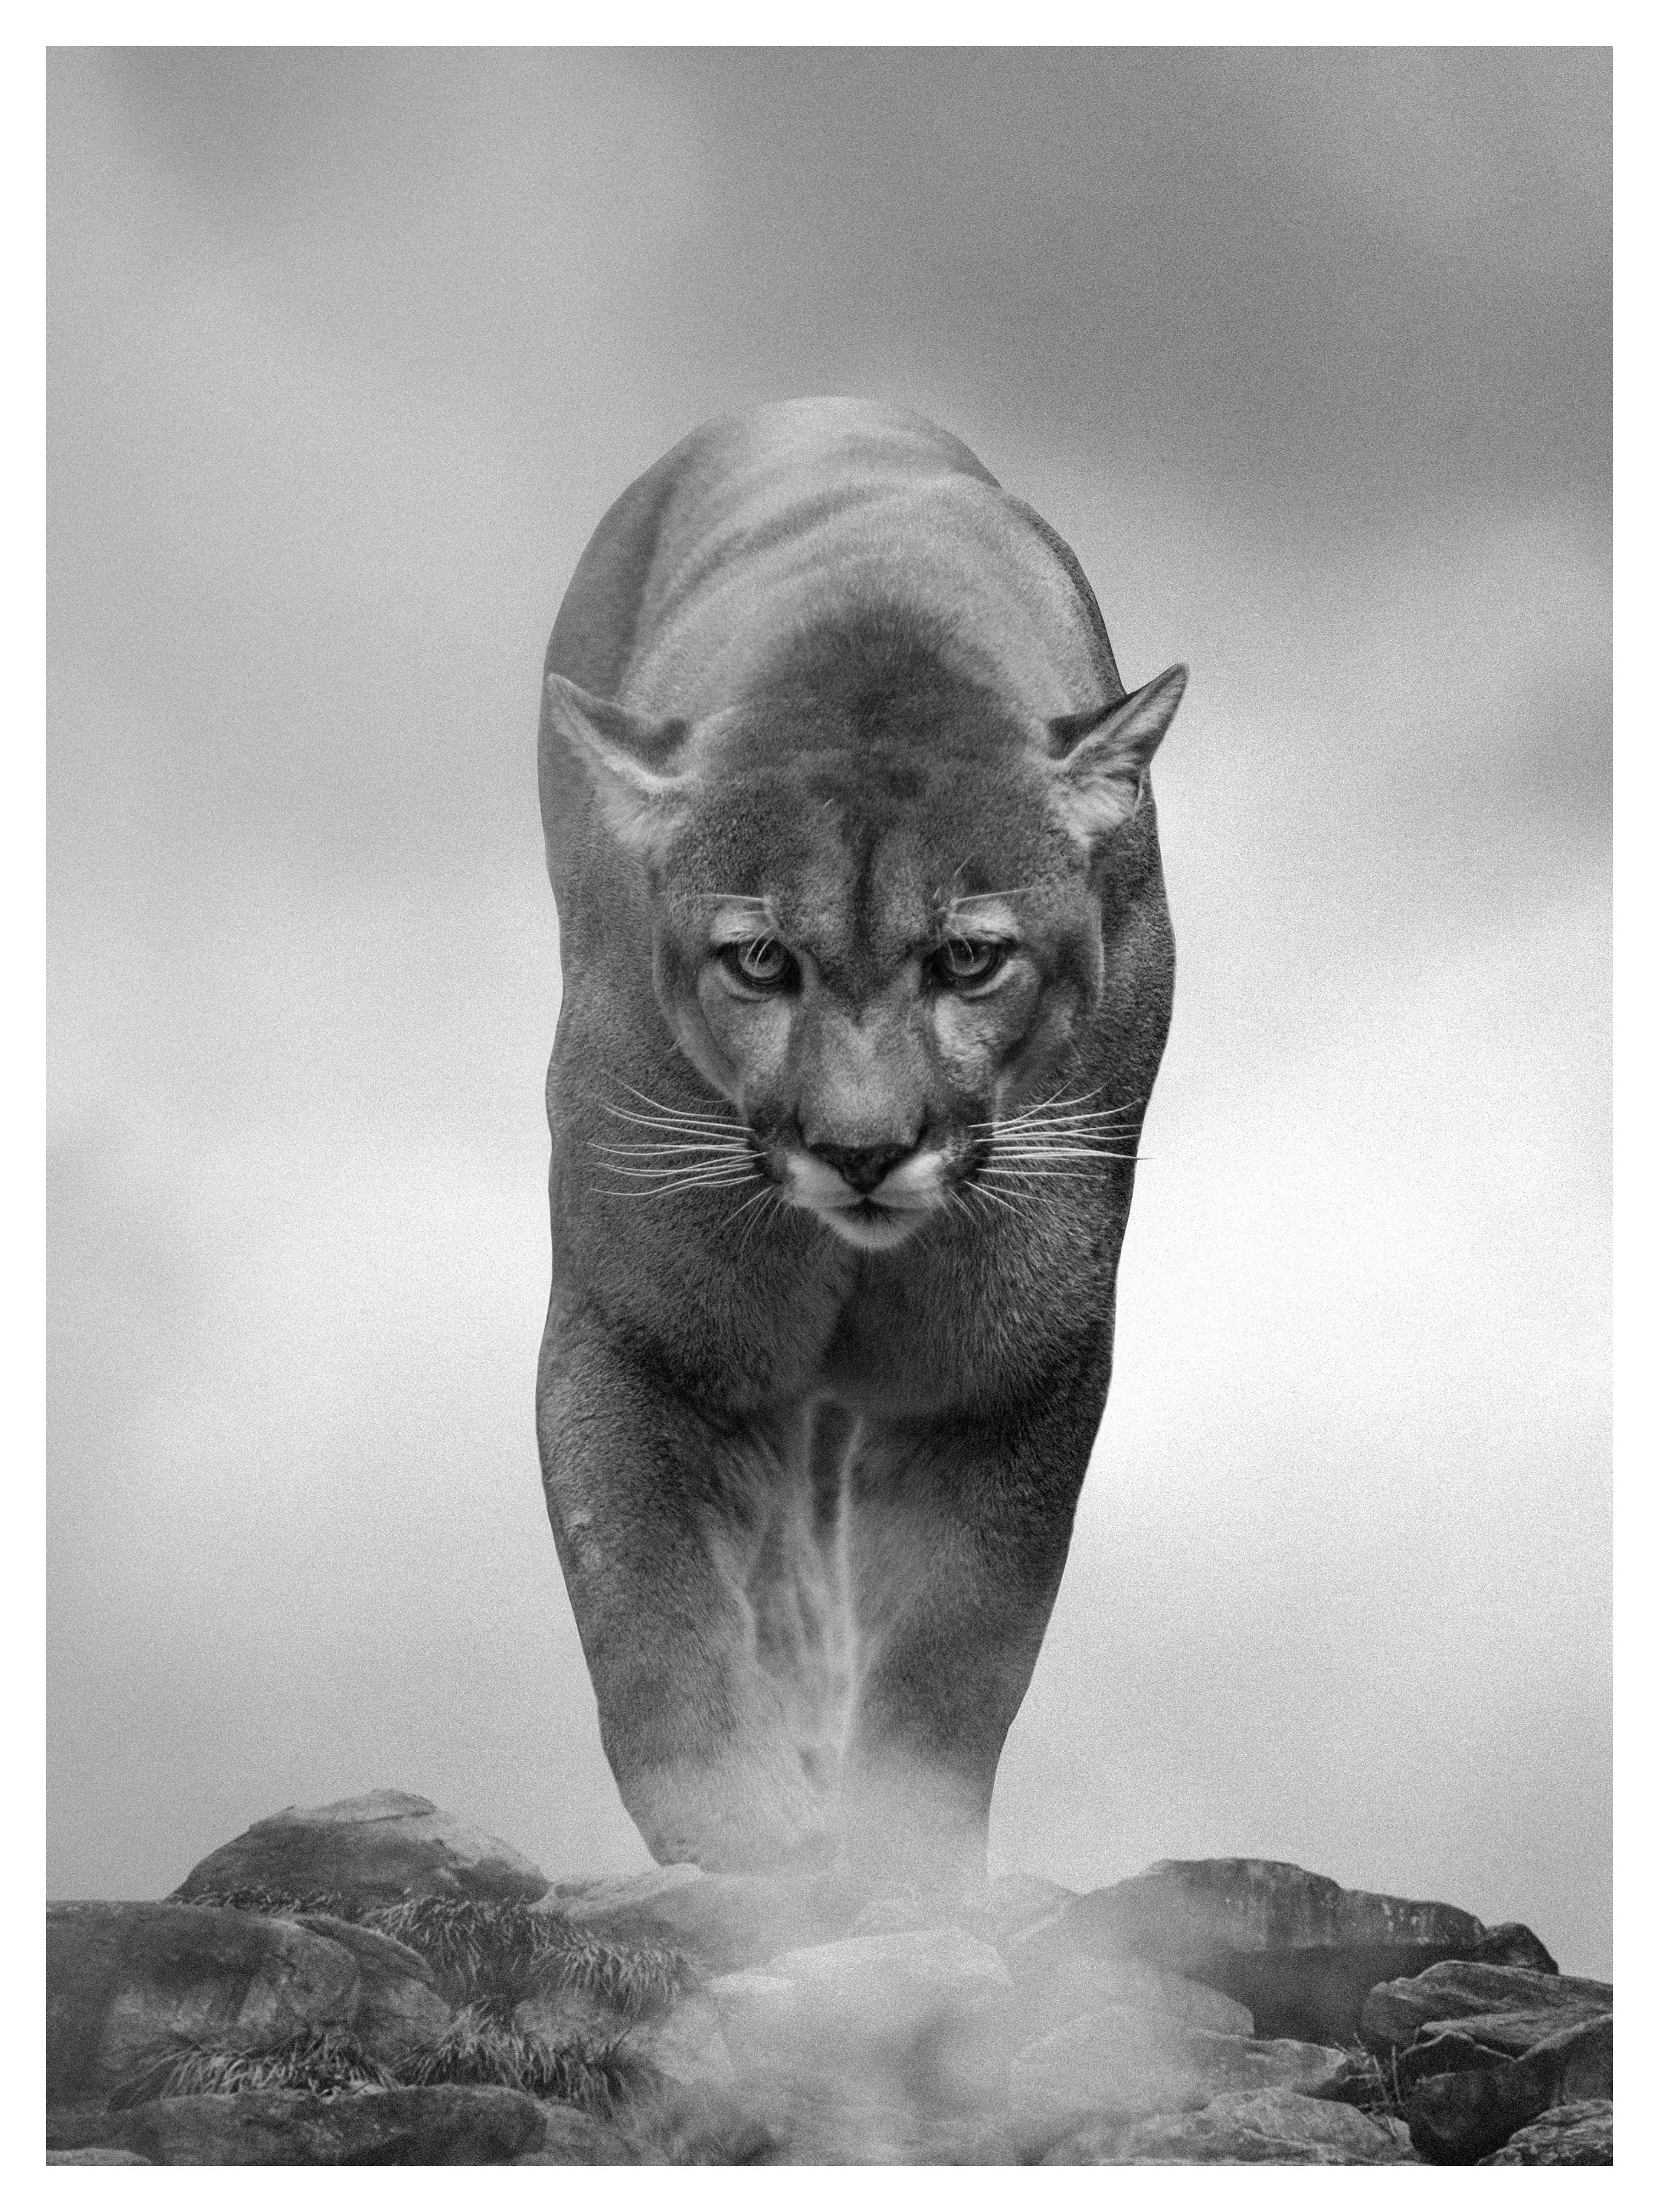 Shane Russeck Landscape Photograph - King of the Mountain - 20x30 Contemporary Black and White Photography, Cougar